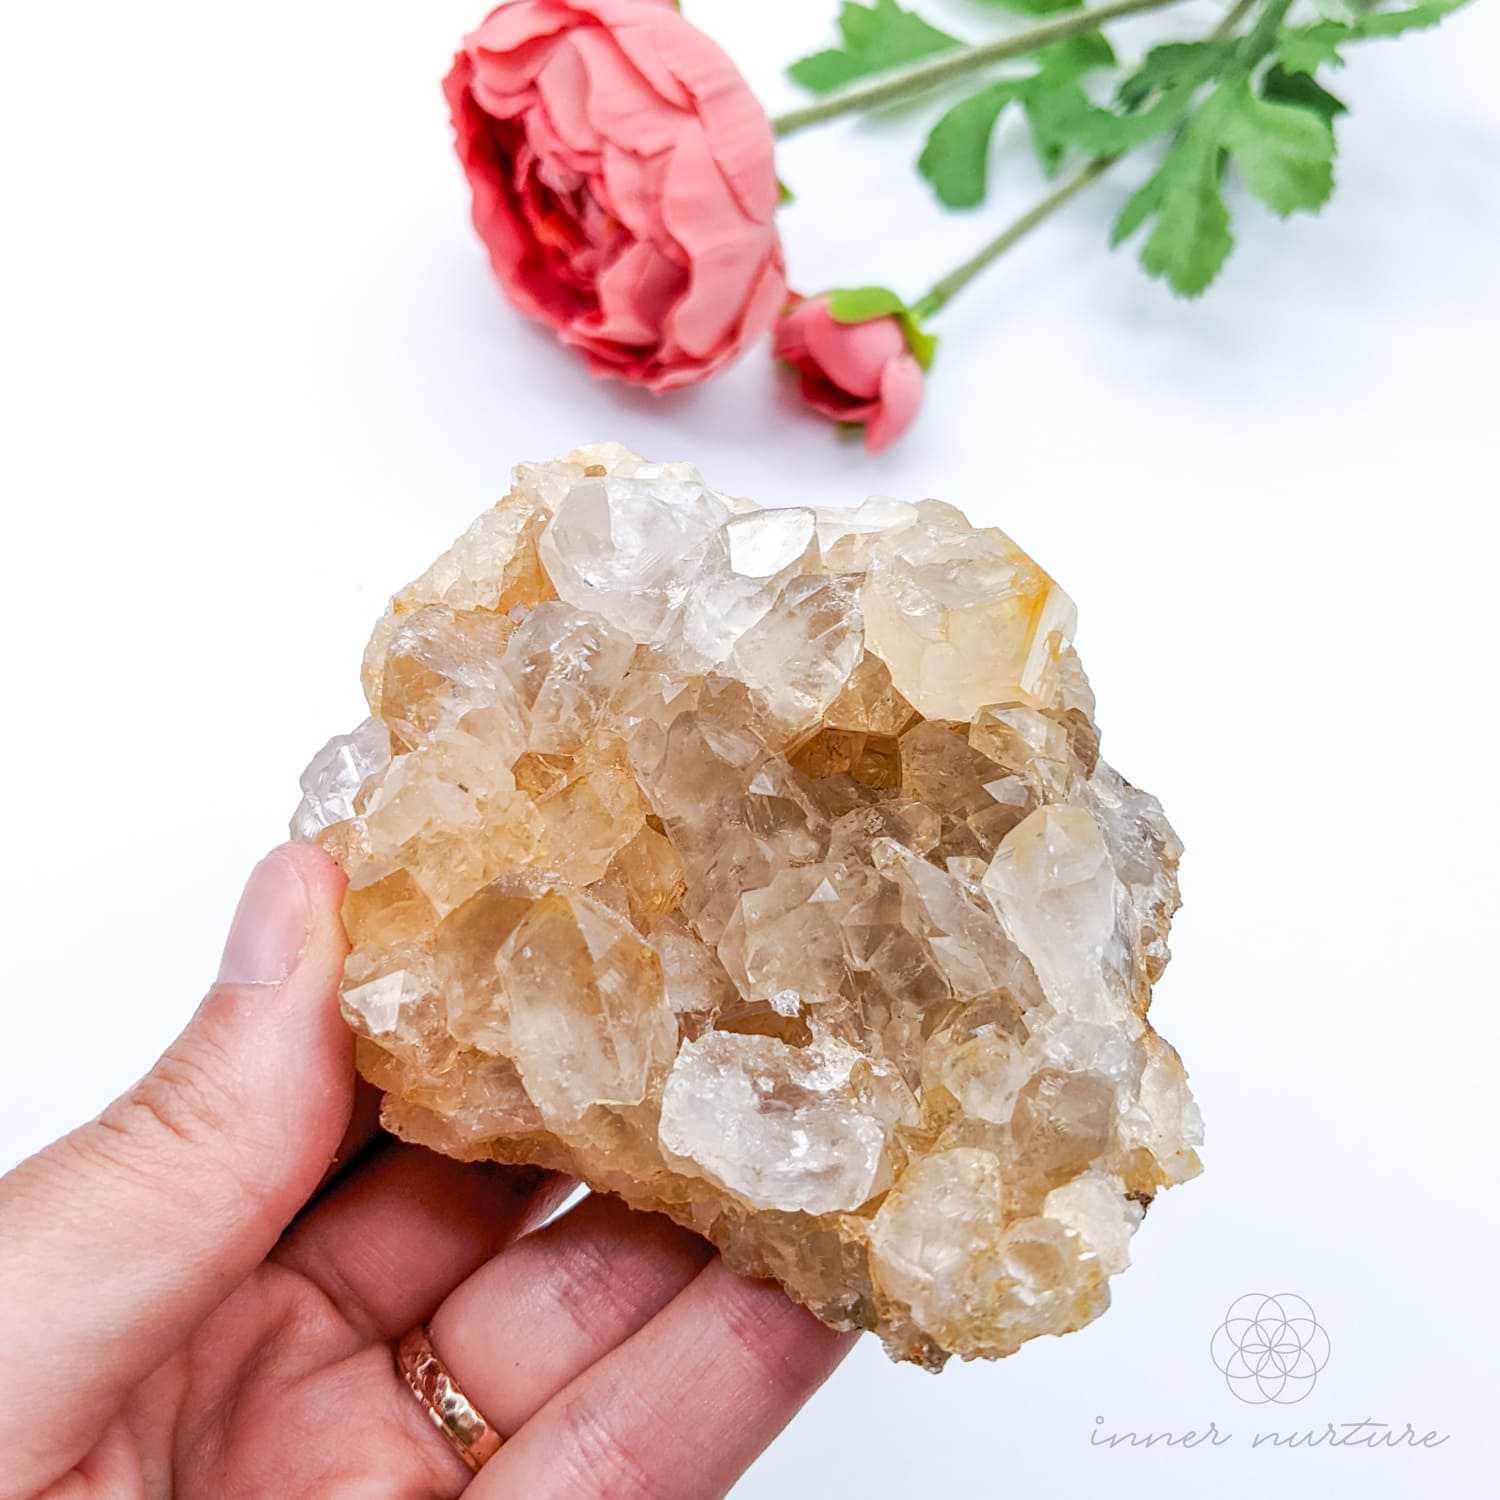 Clear Quartz Cluster With Inclusions - #14 | Crystal Shop Australia - Inner Nurture